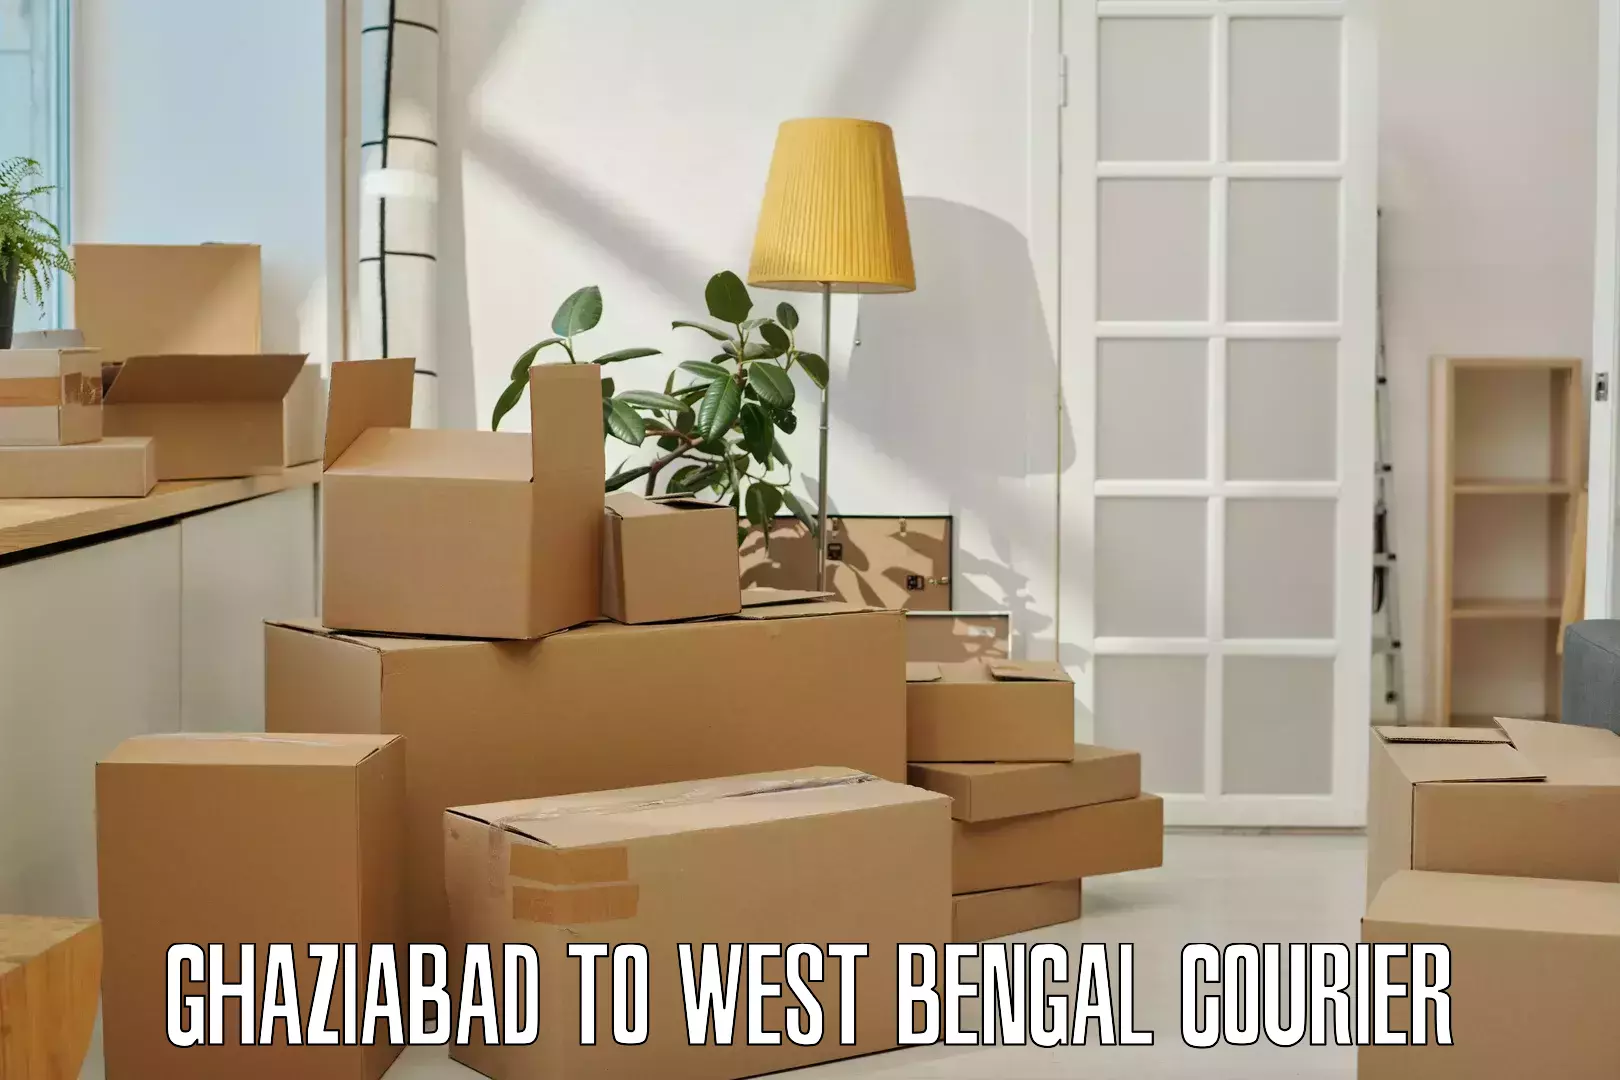 Global logistics network Ghaziabad to West Bengal